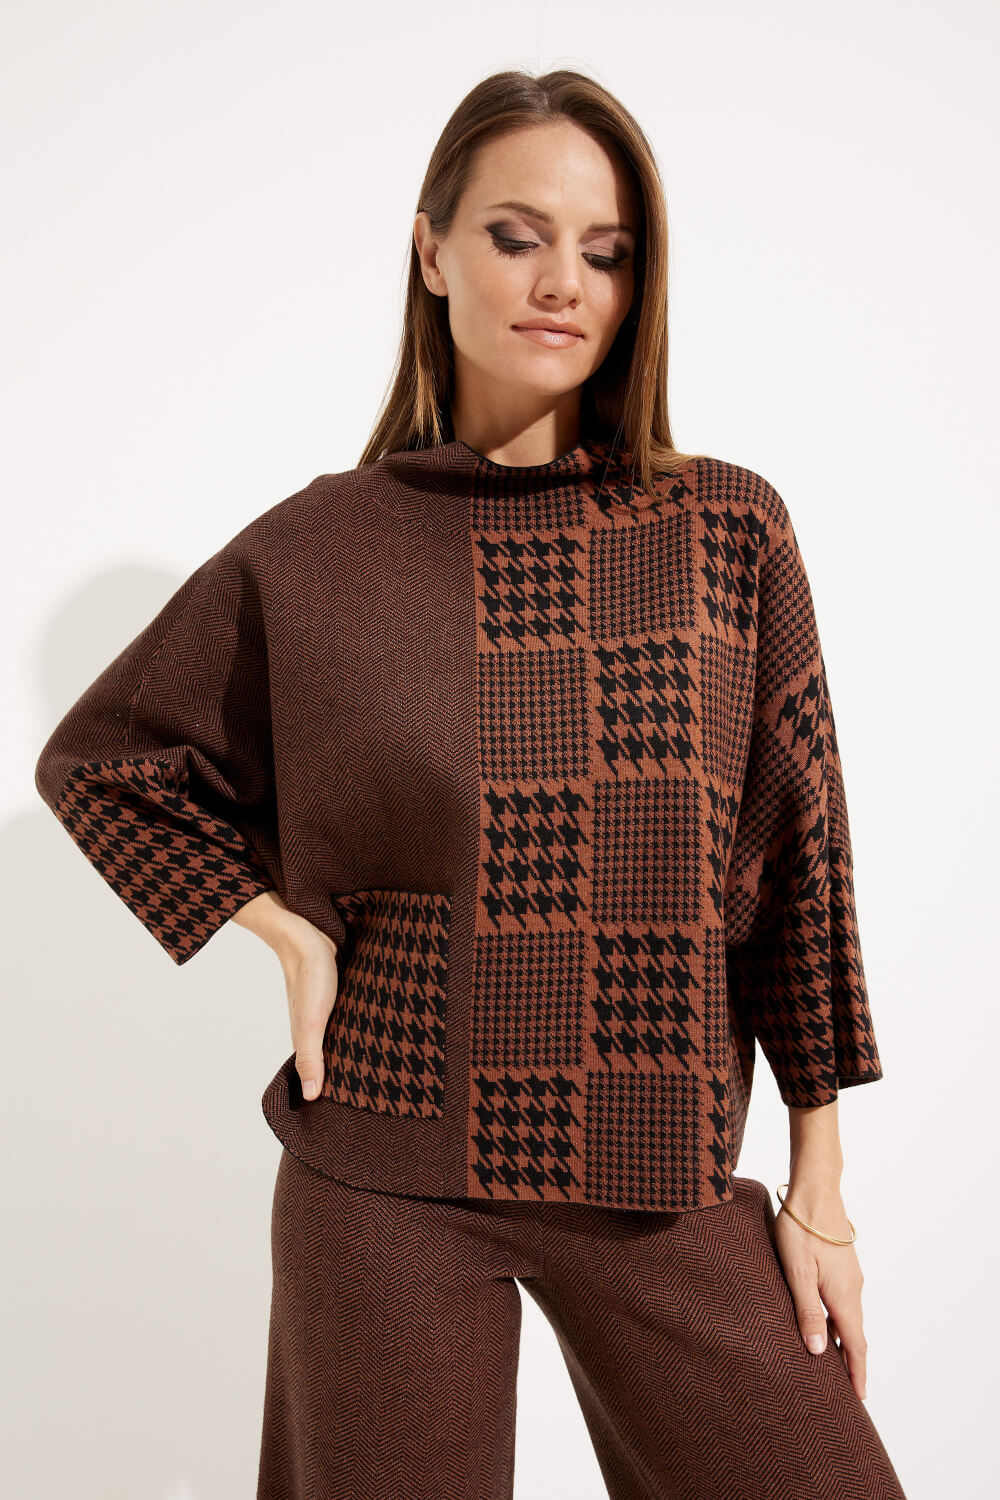 Houndstooth & Patchwork Sweater Style 233903. Black/toffee